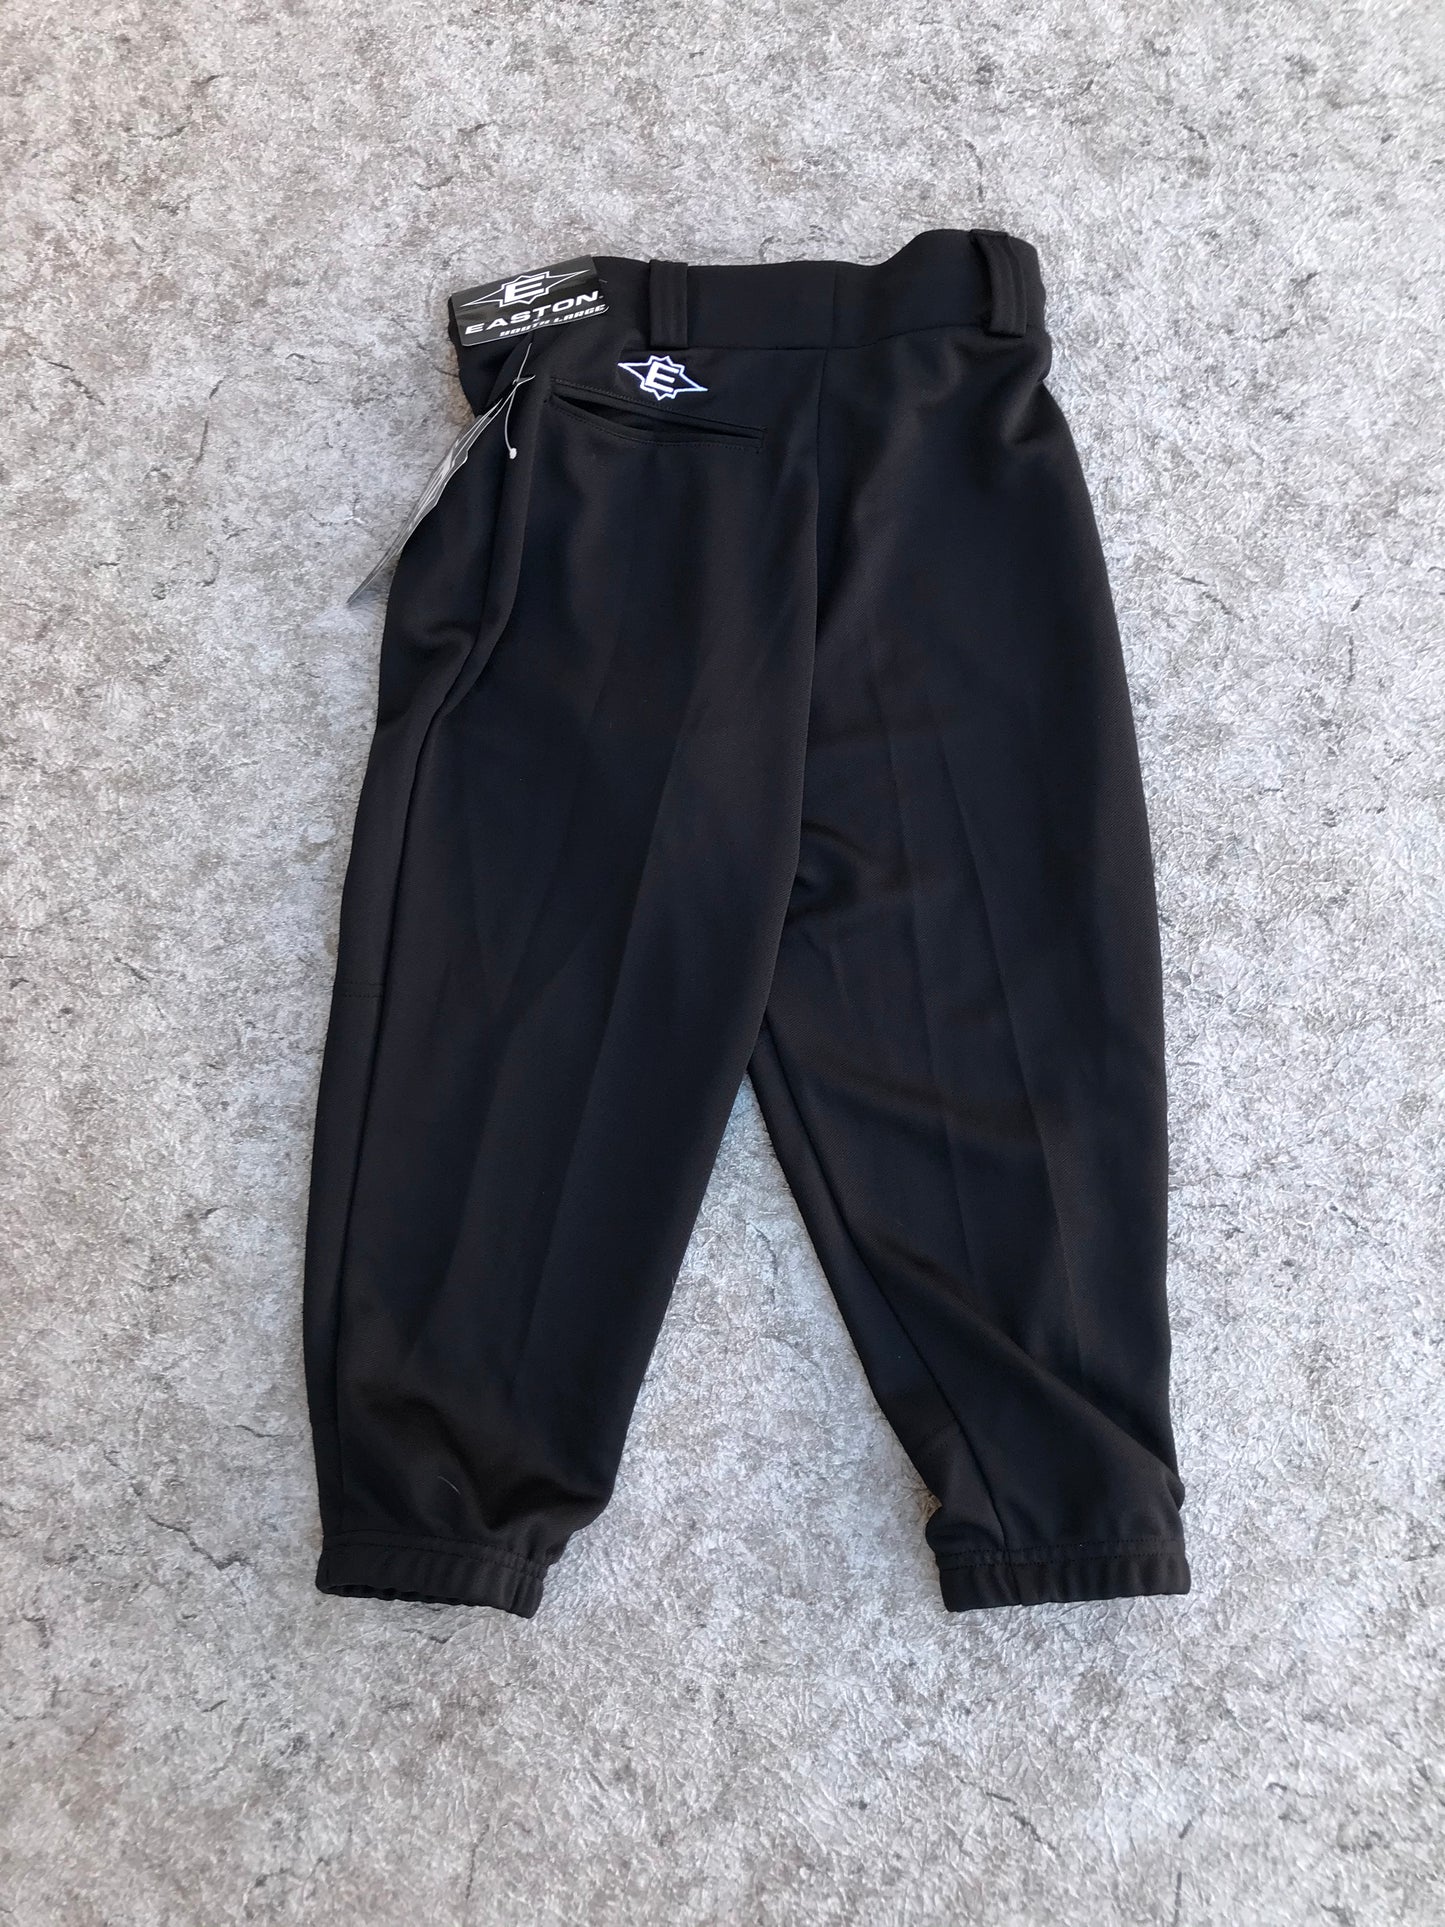 Baseball Pants Child Size Y Large 10-12 Easton Black NEW WITH TAGS